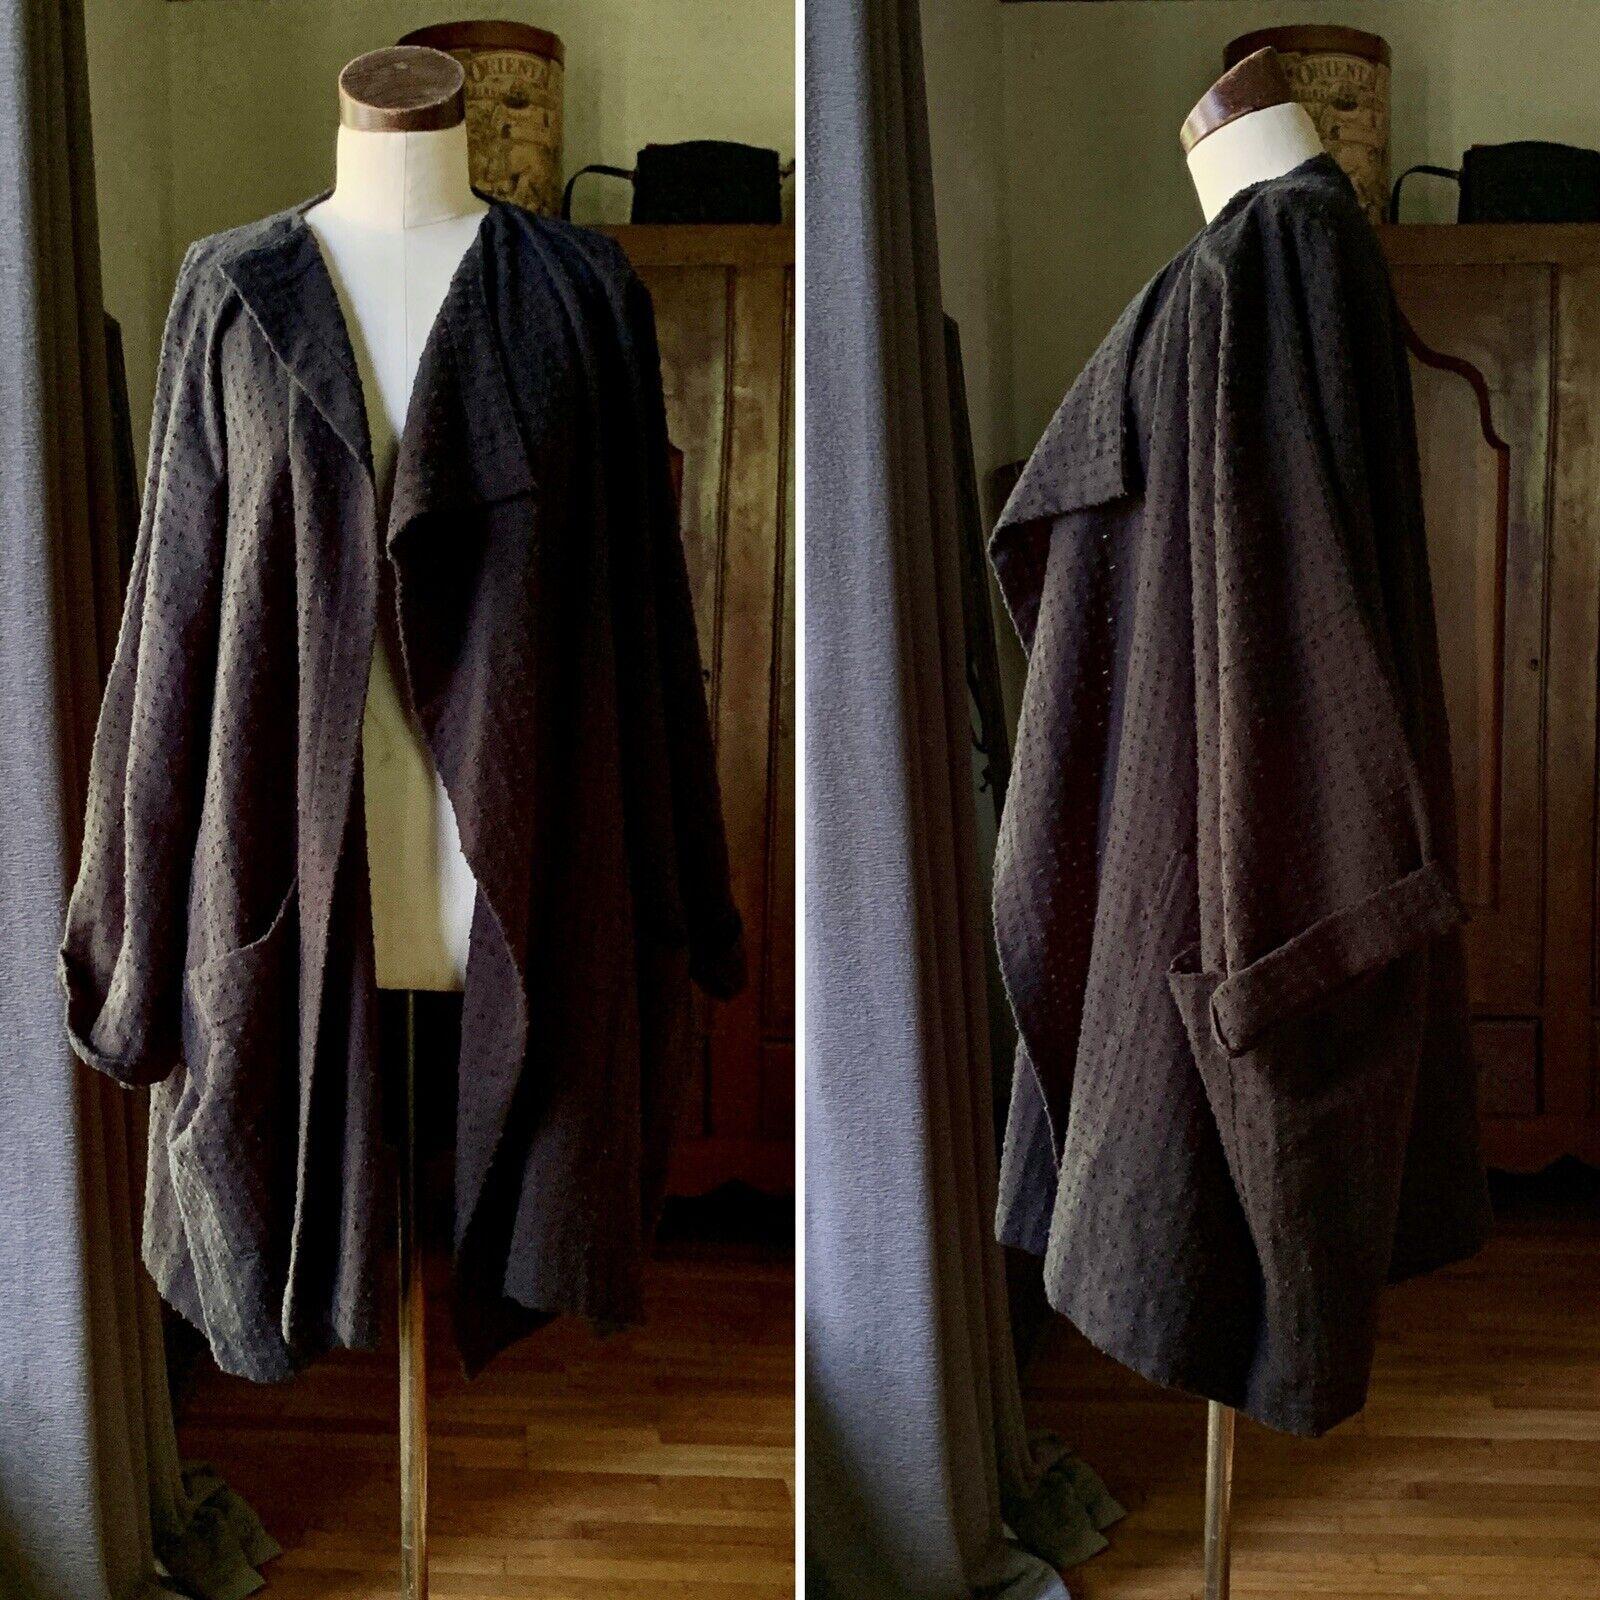 EEskandar, Spring 2009 Collection, Shawl Collar Jacket, Long, Black, Made in England, 100% Linen, Size 1

Measurements Laying Flat
Bust: 37